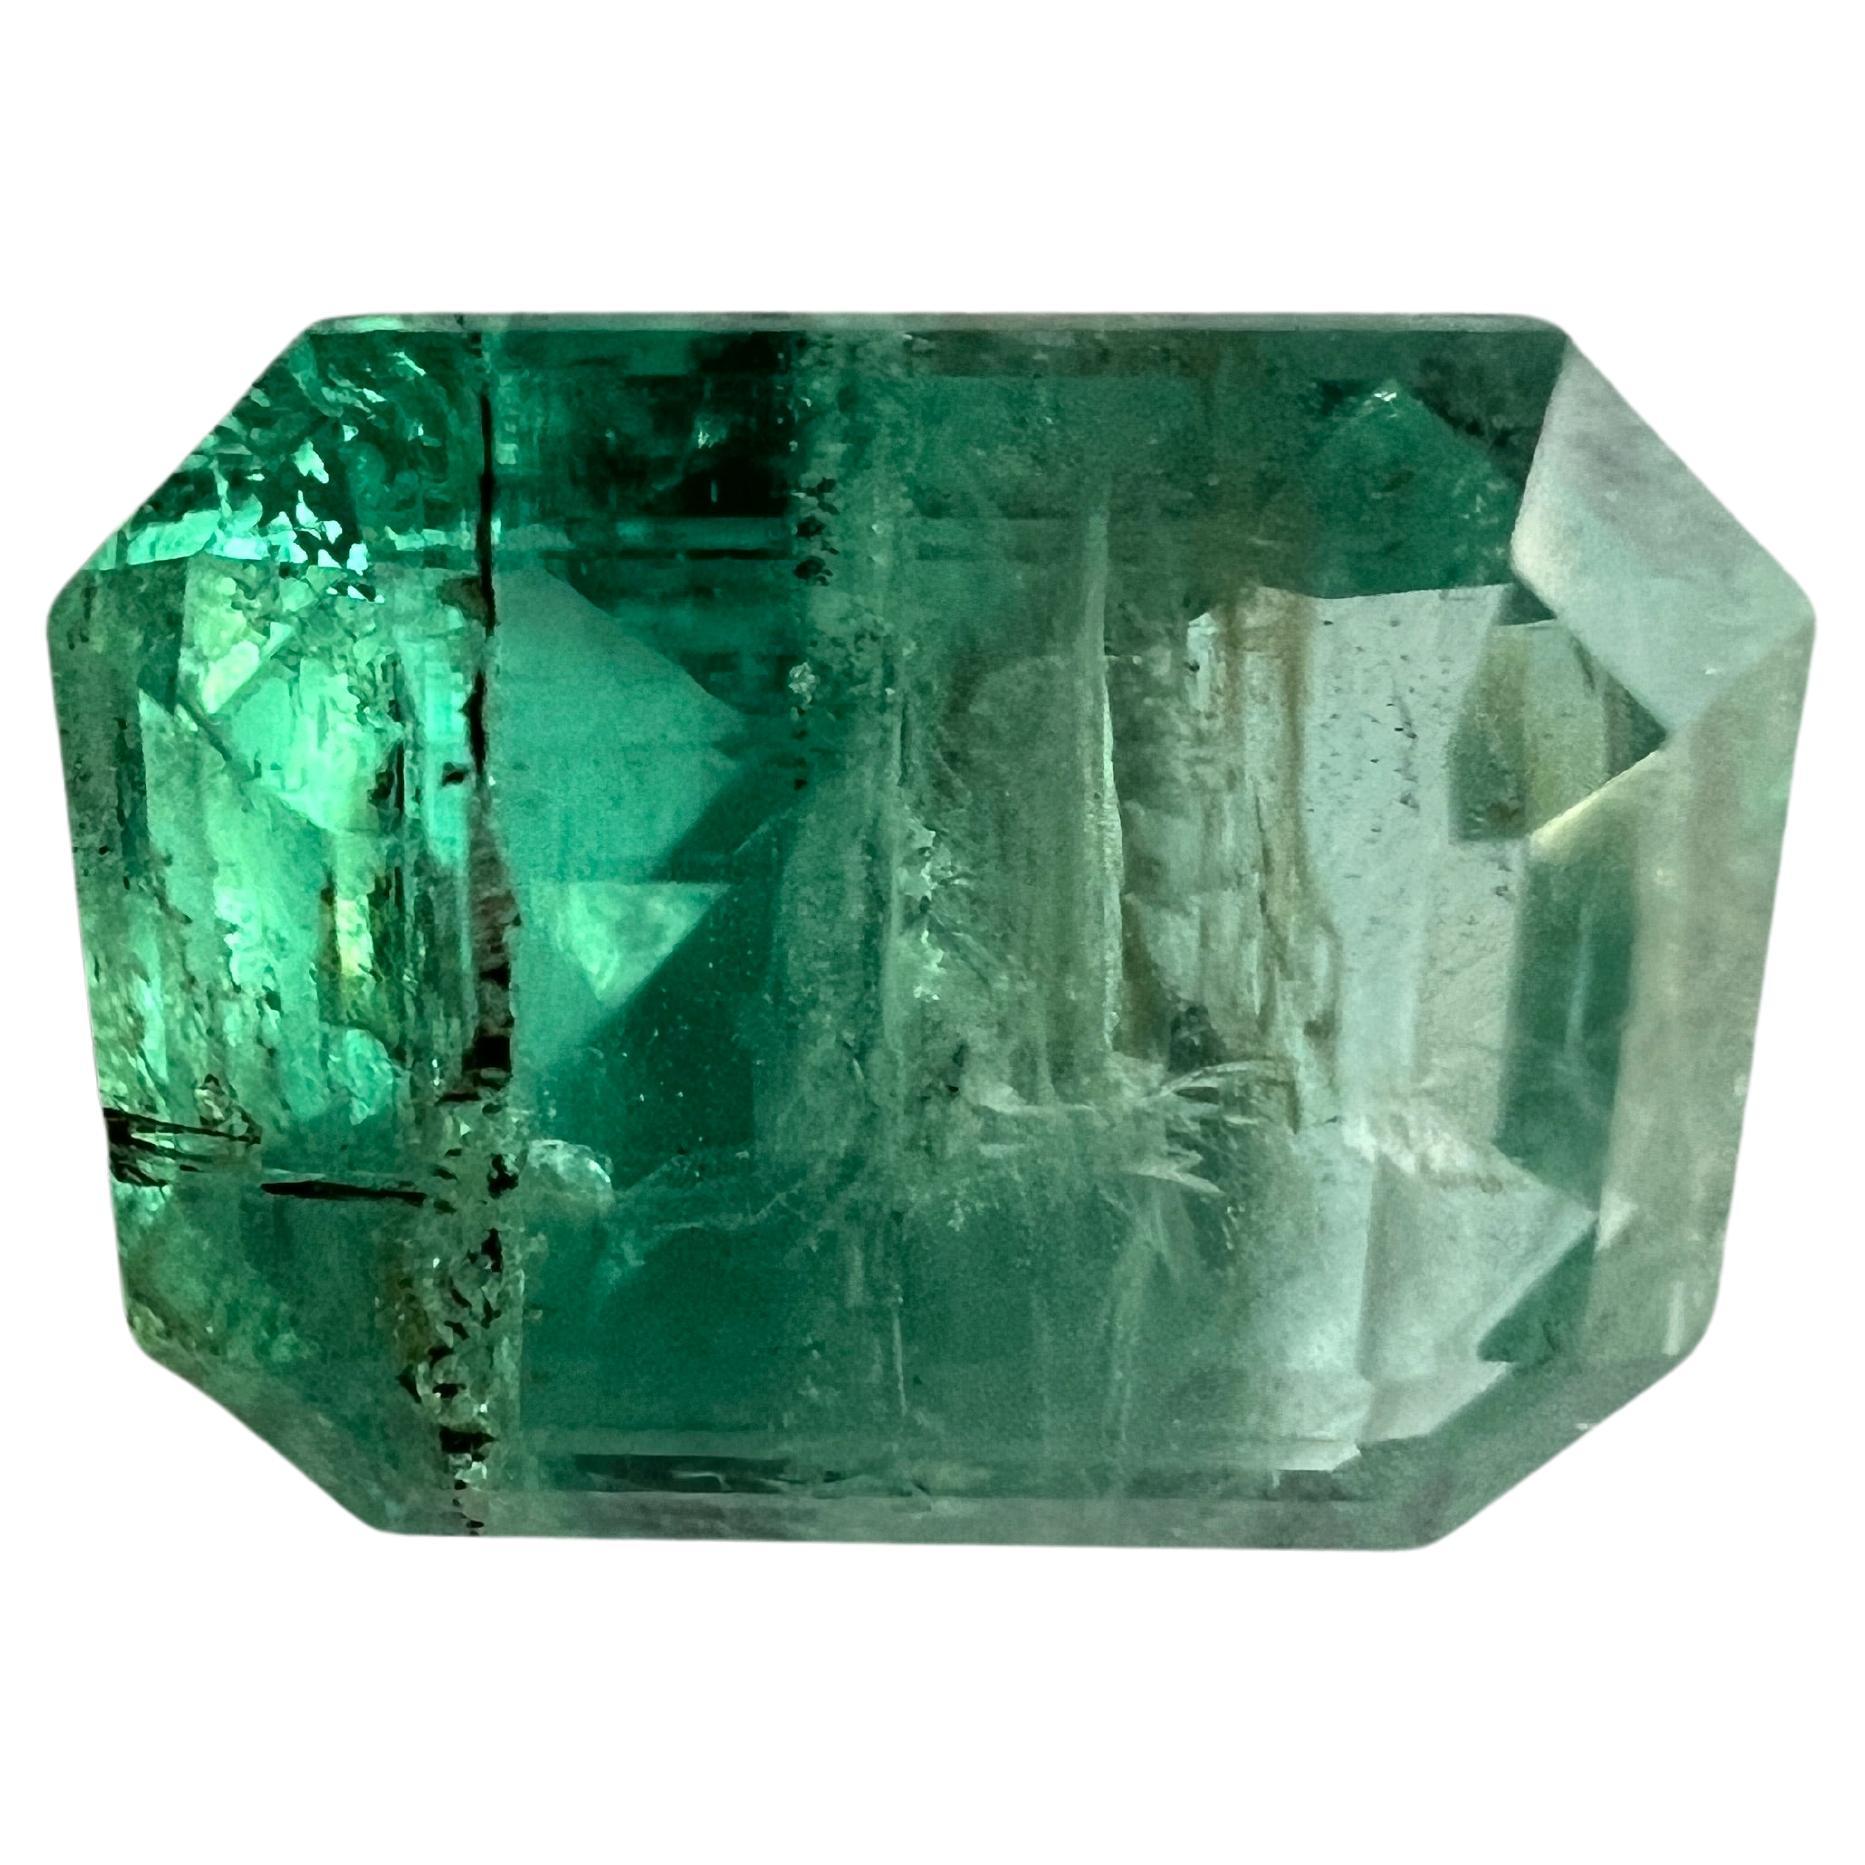 Emerald Cut 6.47Ct NON-OILED  Untreated Natural EMERALD Gemstone For Sale